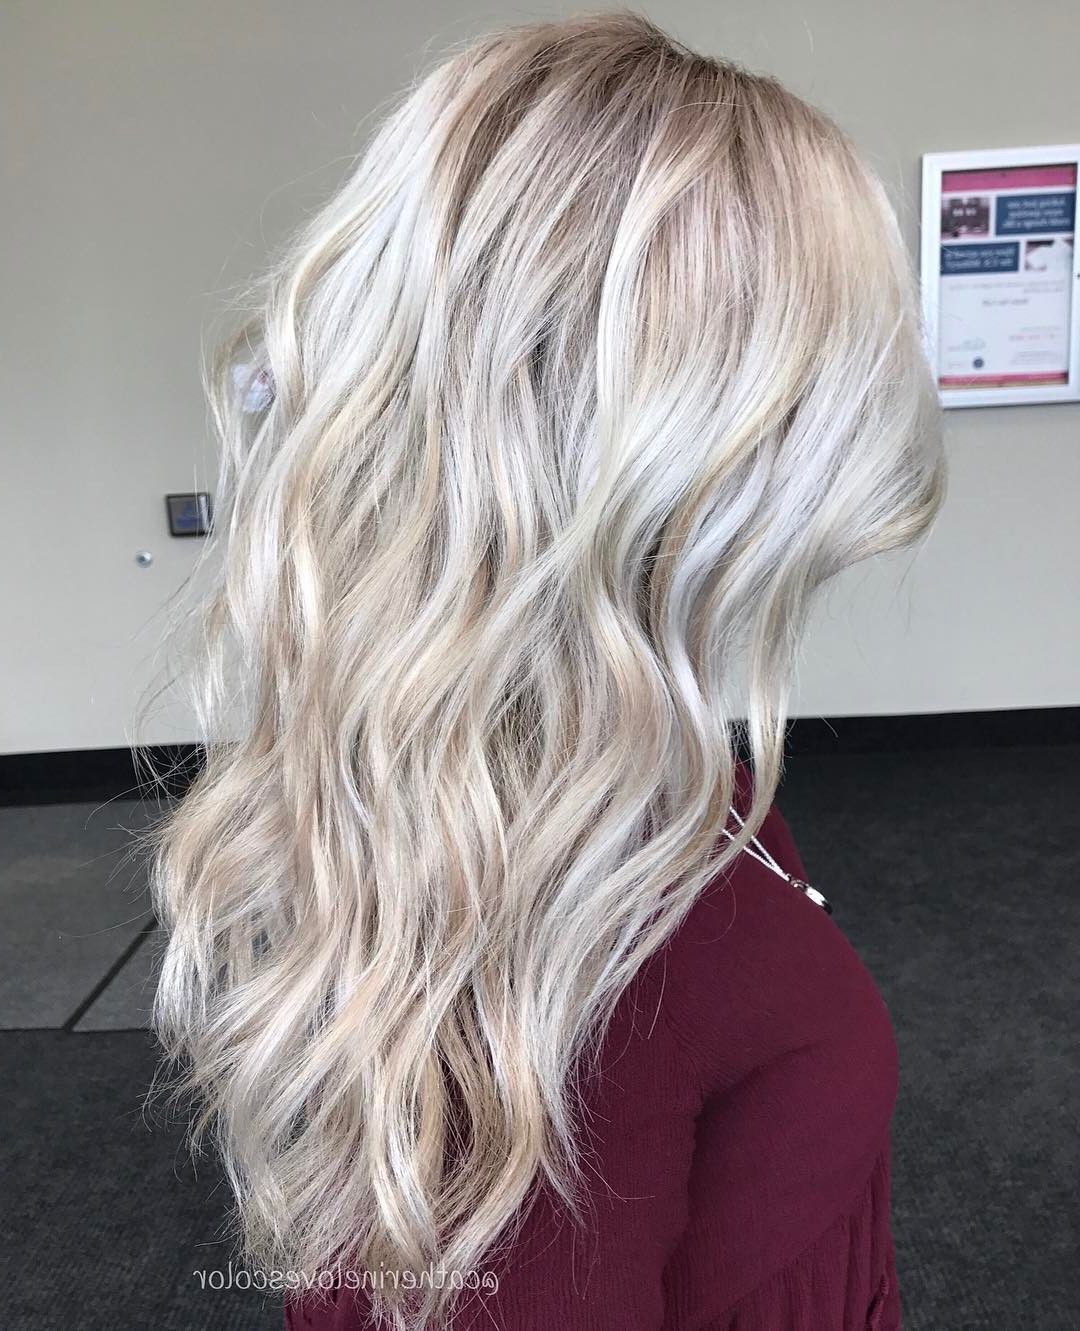 20 Adorable Ash Blonde Hairstyles To Try: Hair Color Ideas 2018 In White Blonde Curly Layered Bob Hairstyles (Gallery 217 of 292)